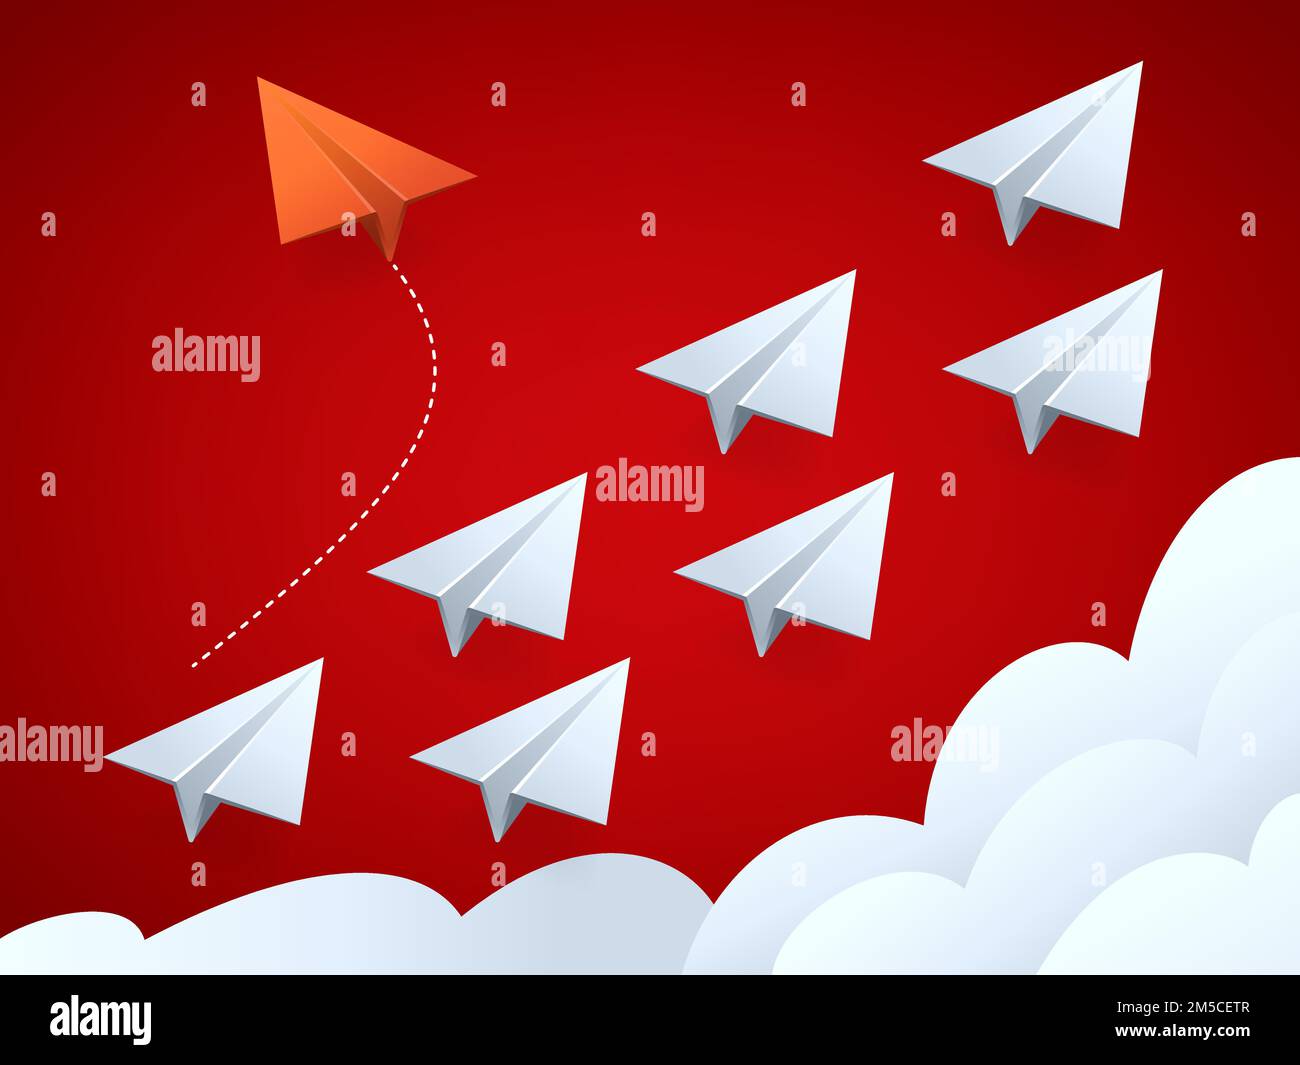 Vector illustration of Minimalist style red airplane changing direction and white ones. New idea, change, trend, courage, creative solution, innovatio Stock Vector